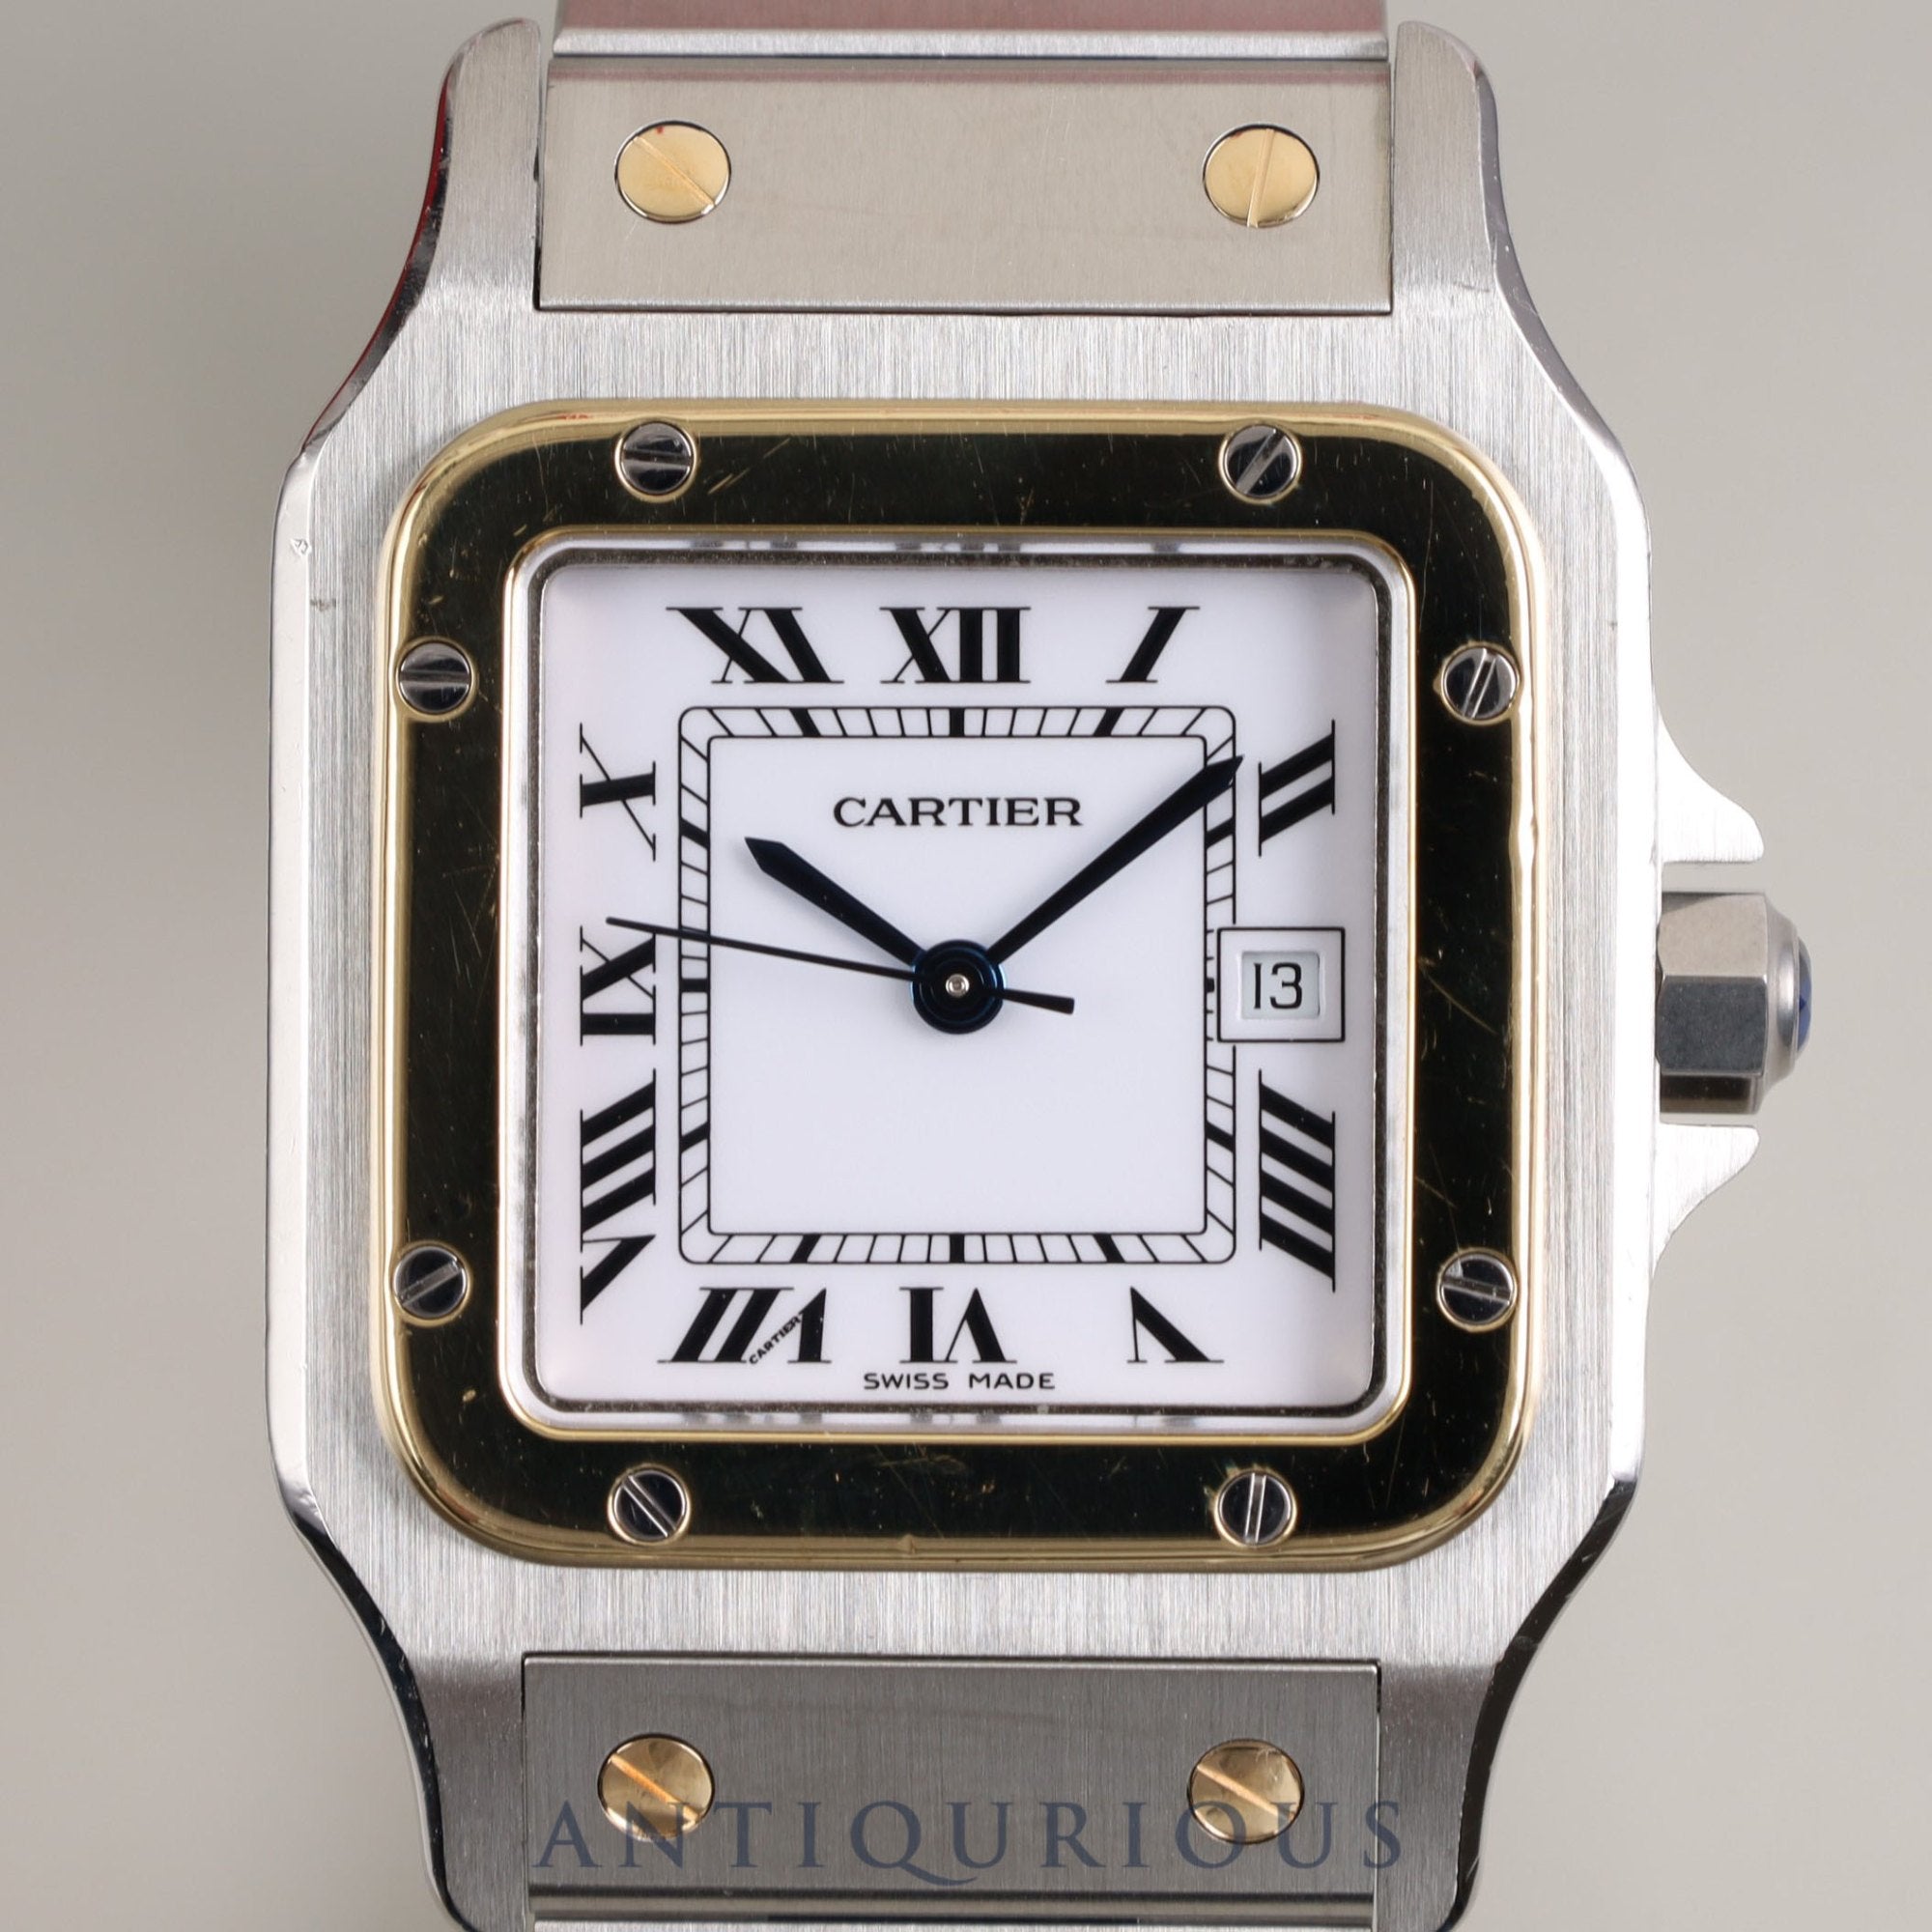 CARTIER SANTOS GALBEE LM AC 23.80 gr Automatic SS/YG SS/YG White Dial Cartier Boutique Complete Service